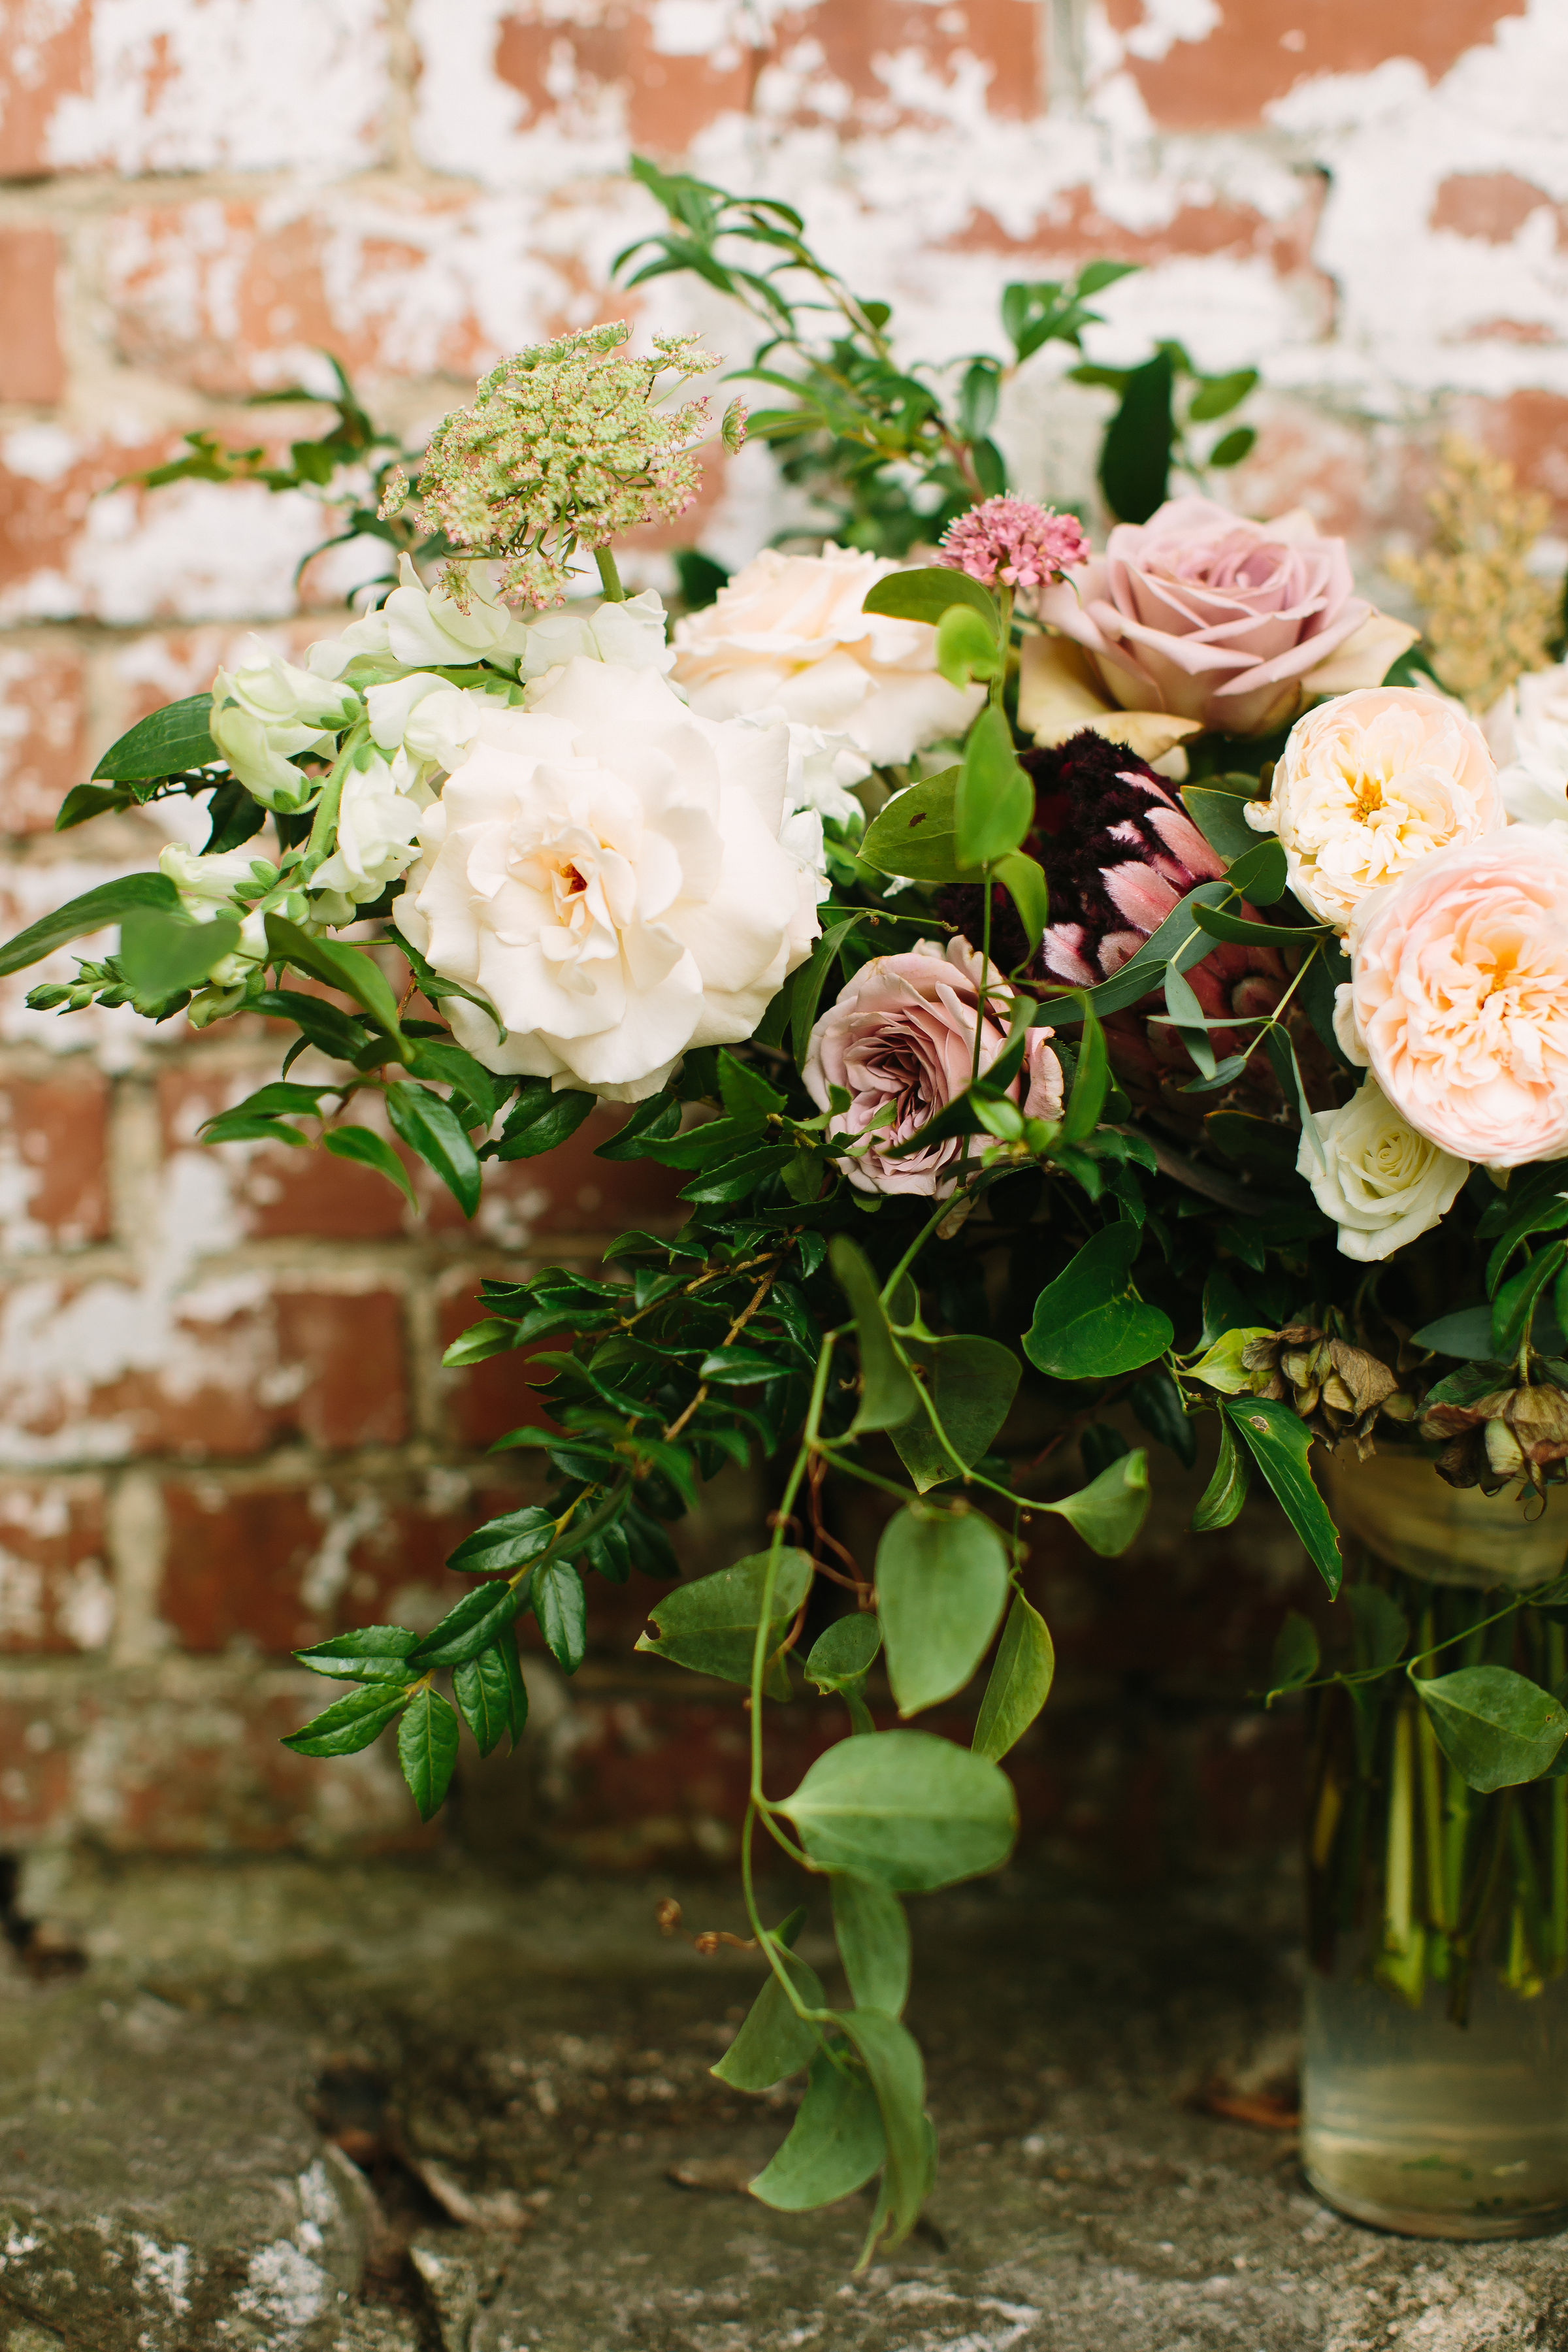 Lush bridal bouquet with garden roses and ranunculus in hues of cream and dusty mauve // Nashville Wedding Floral Design